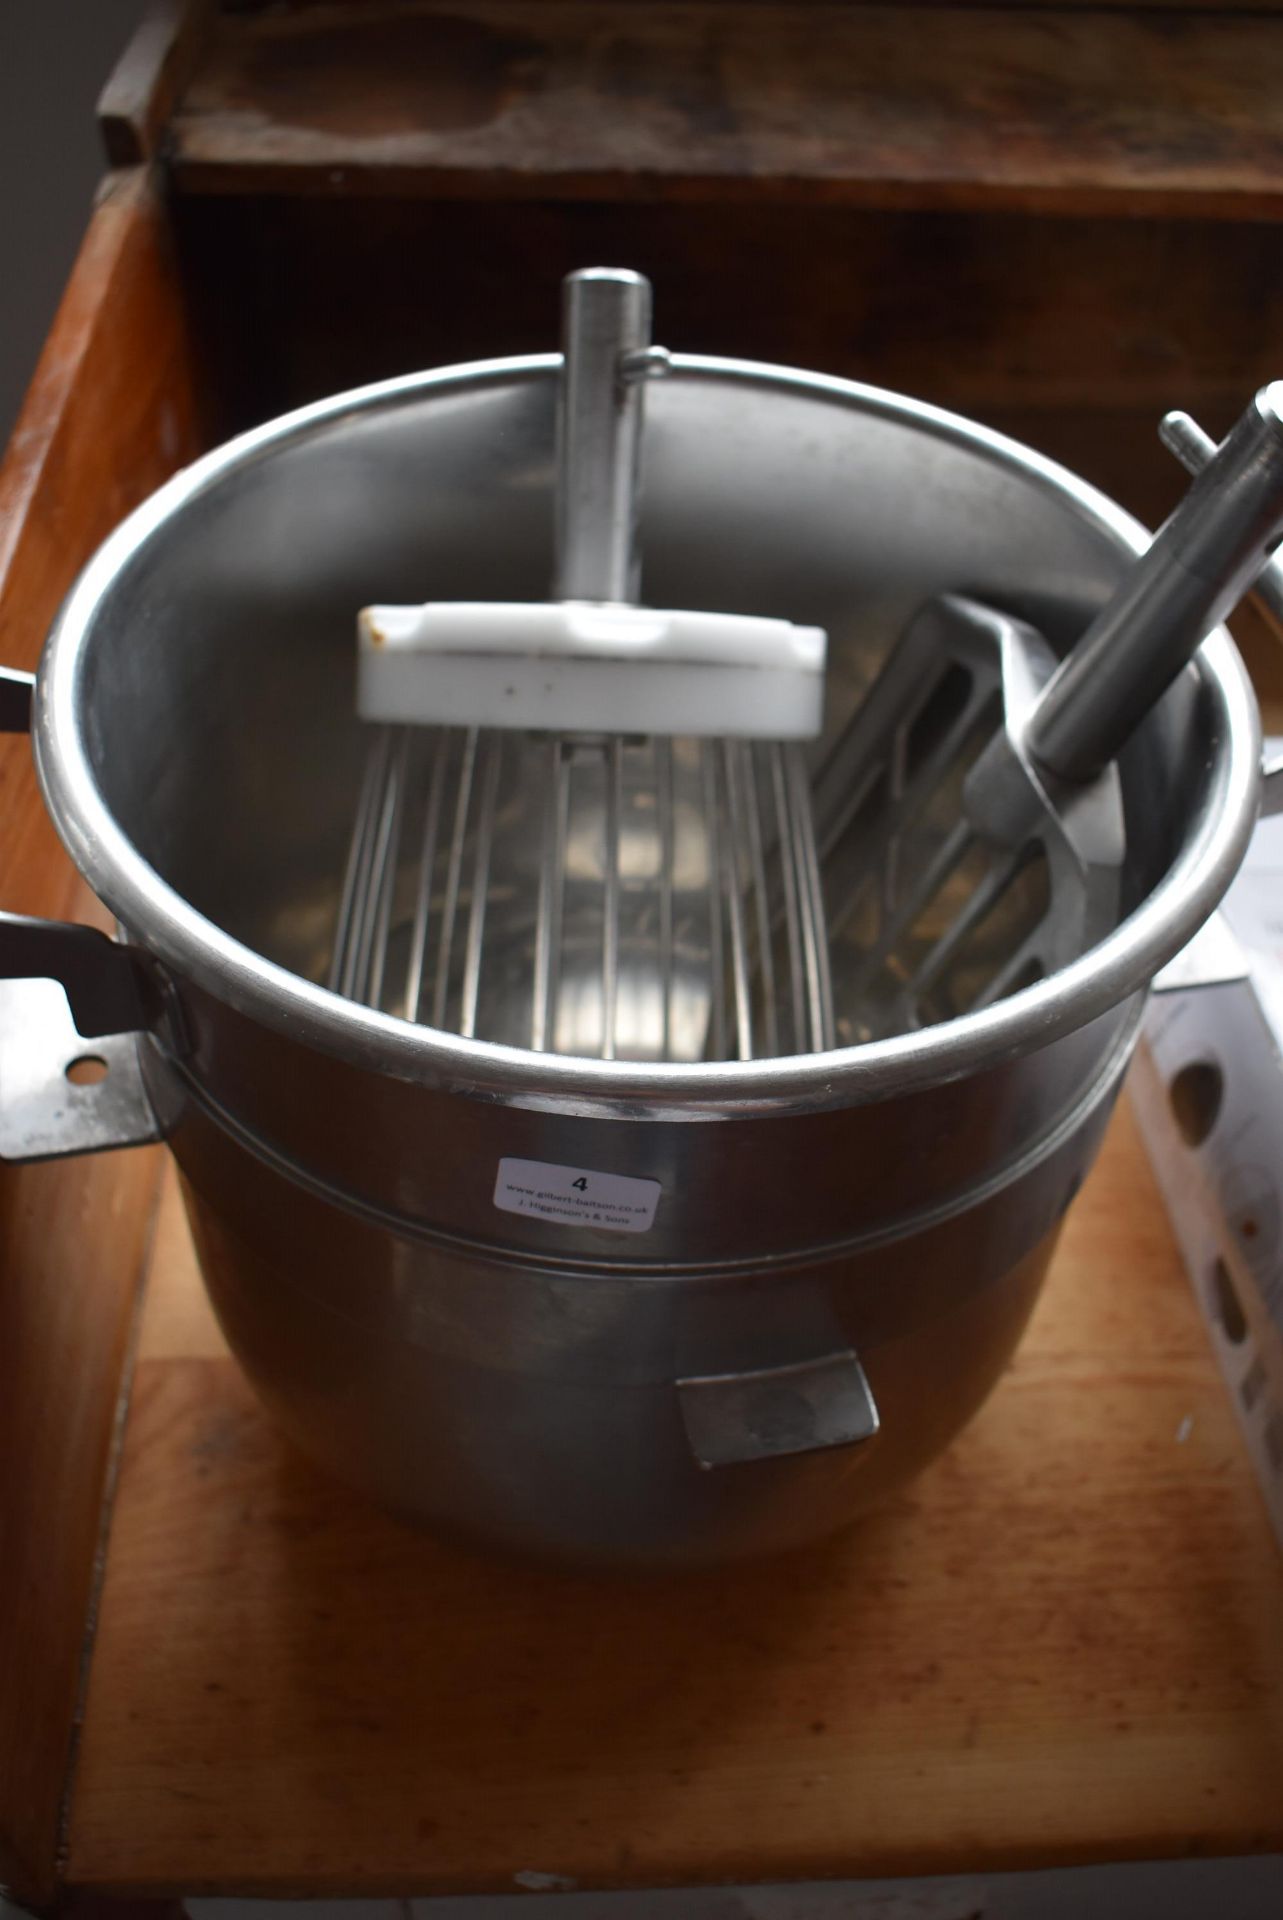 *Stainless Steel Bowl, Whisk, and Paddle to Suit Ferneto Mixer